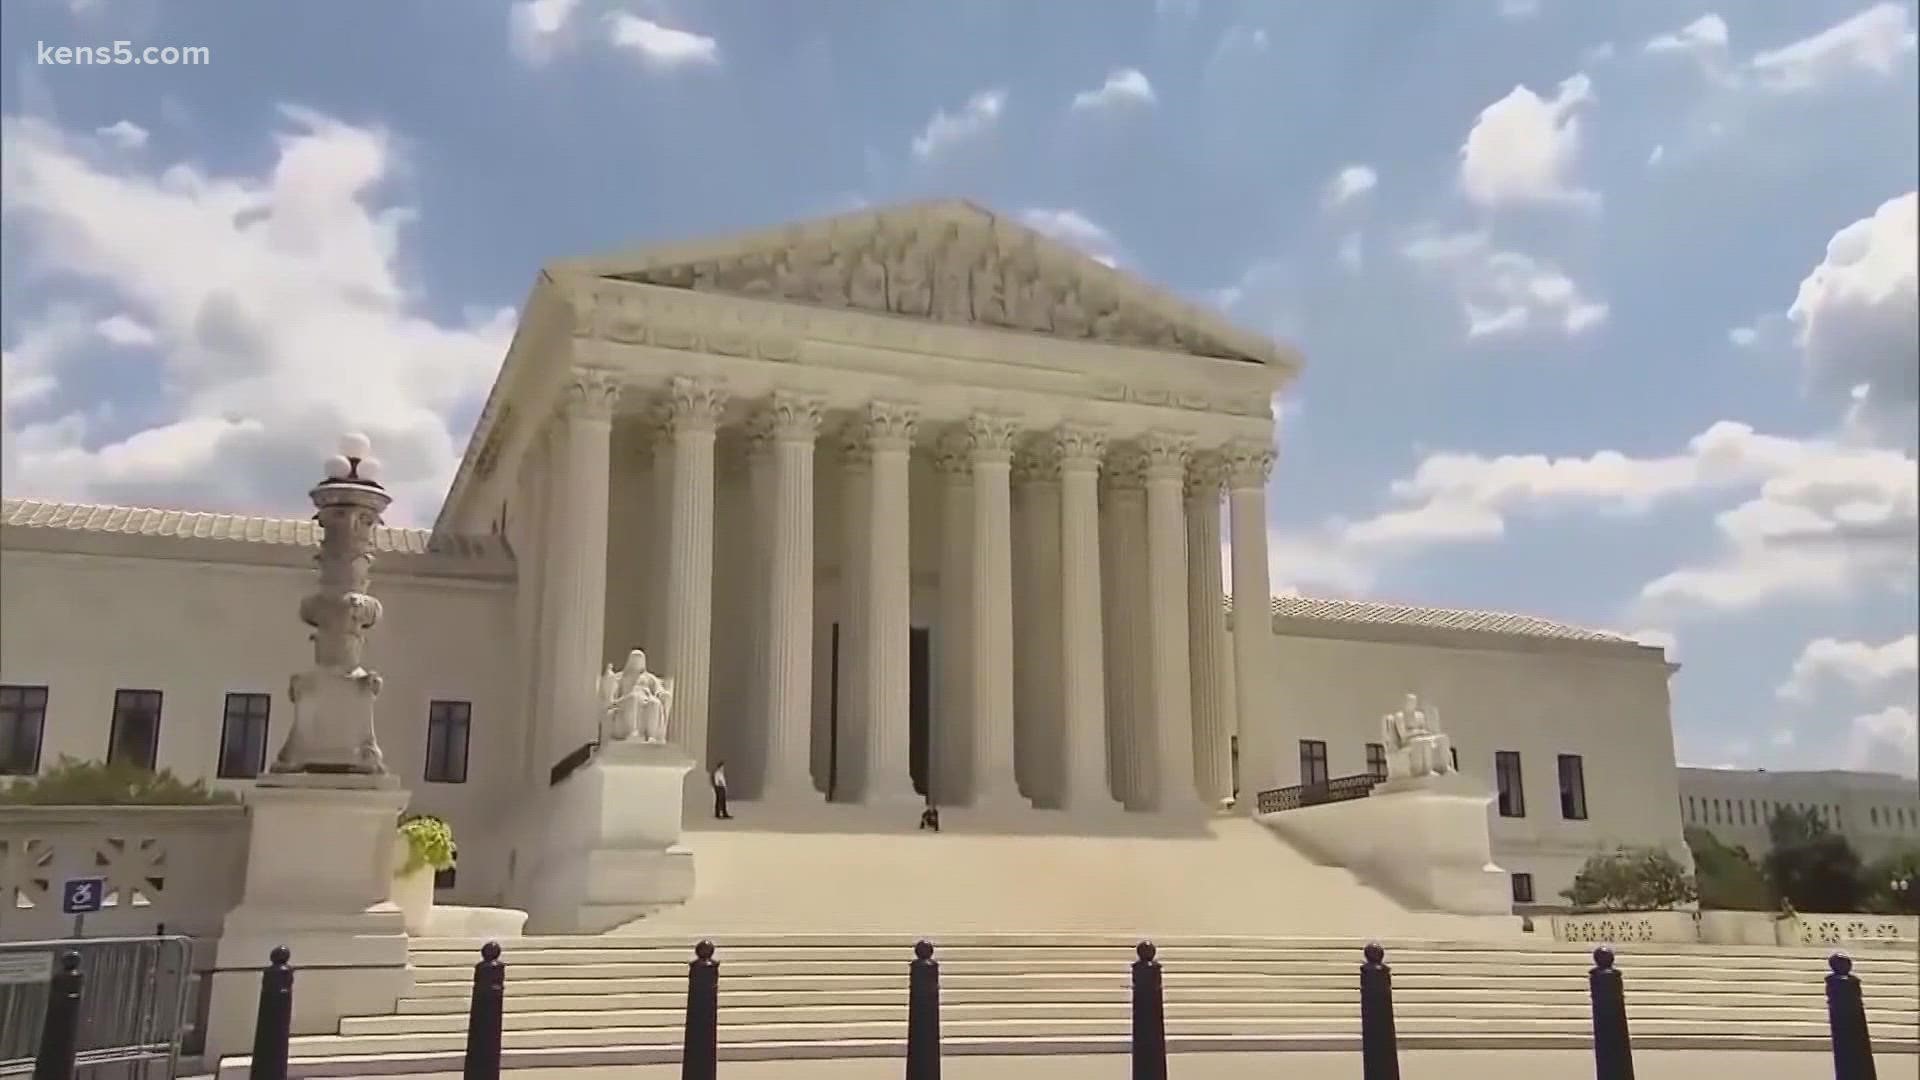 The Supreme Court Wednesday heard oral arguments over a Mississippi law that would ban abortions after 15 weeks. Justices' decision will matter to Texans.